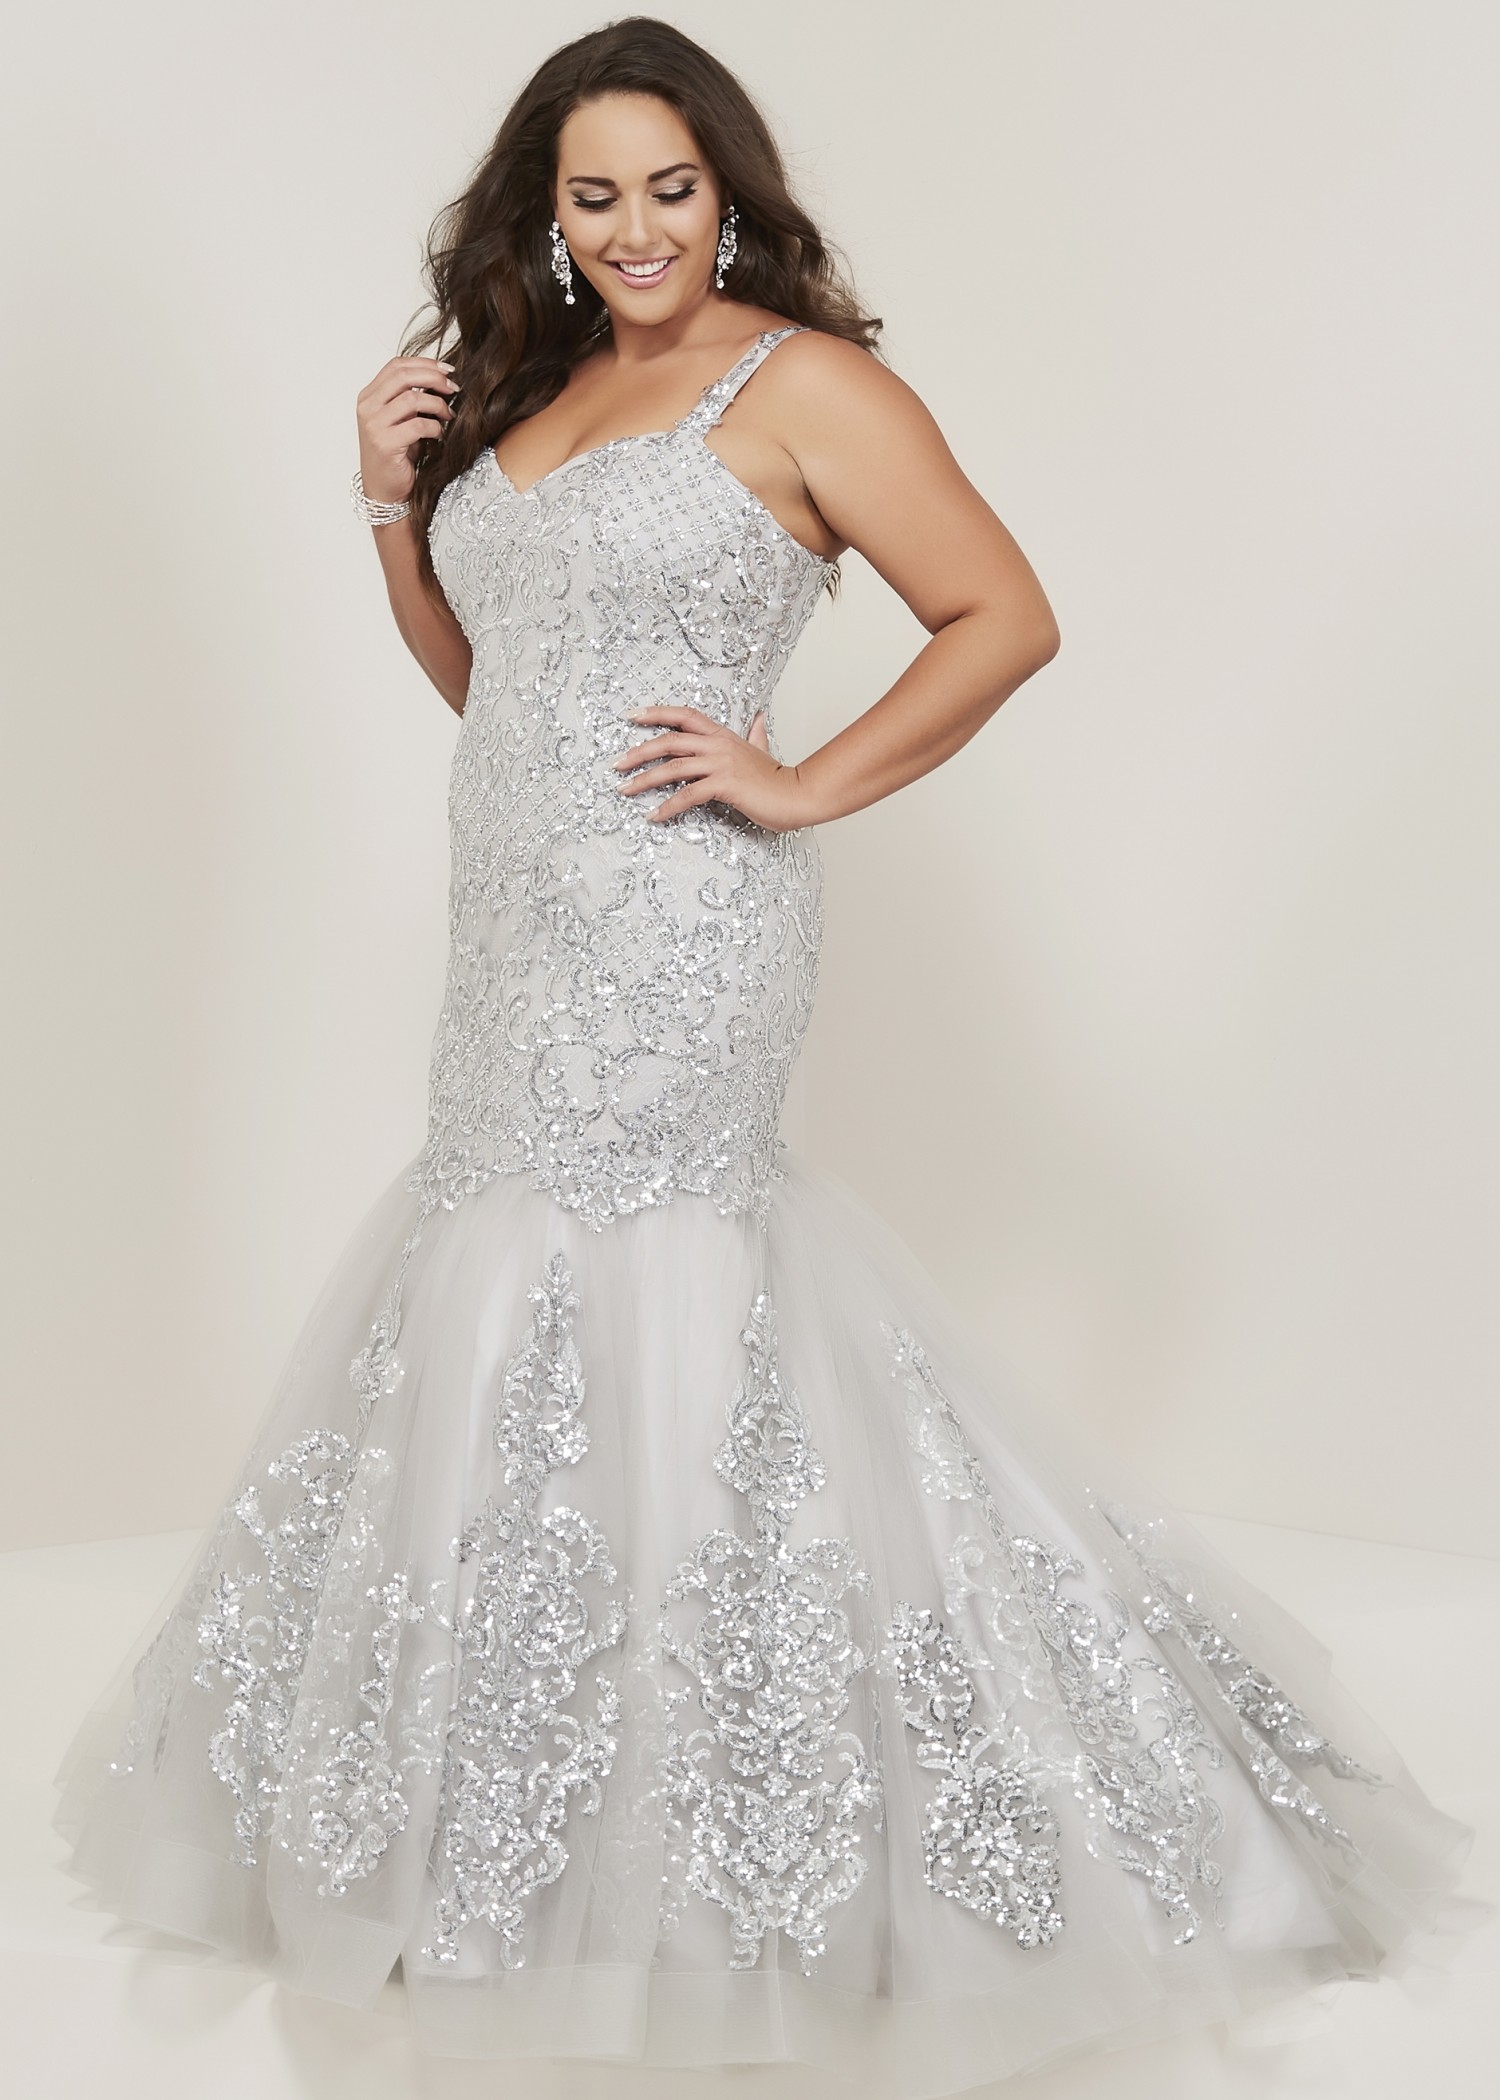 Tiffany Designs 16378 Sequin Lace Mermaid Gown